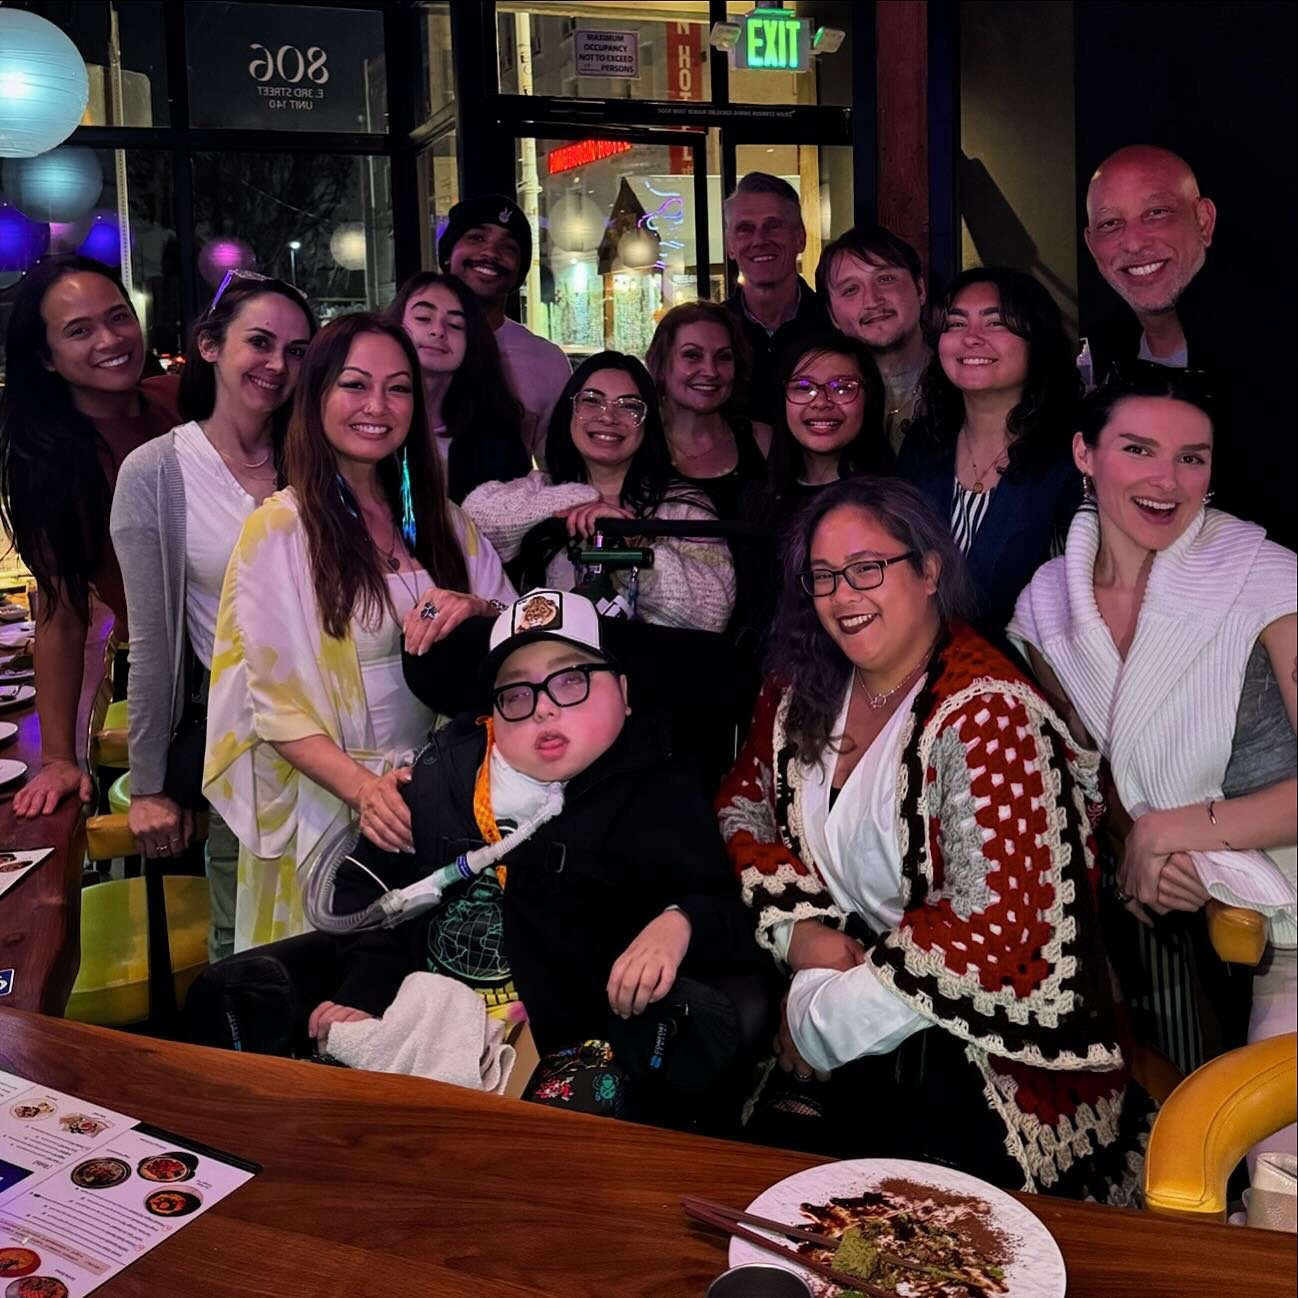 Thank you to everyone who wished Kyle a happy 18th birthday! ❤️🎂

We celebrated with a fun excursion to Luna Luna @lunaluna in DTLA followed by a delicious dinner at @taberu_la surrounded by family and loved ones! It was an amazing time and we all e